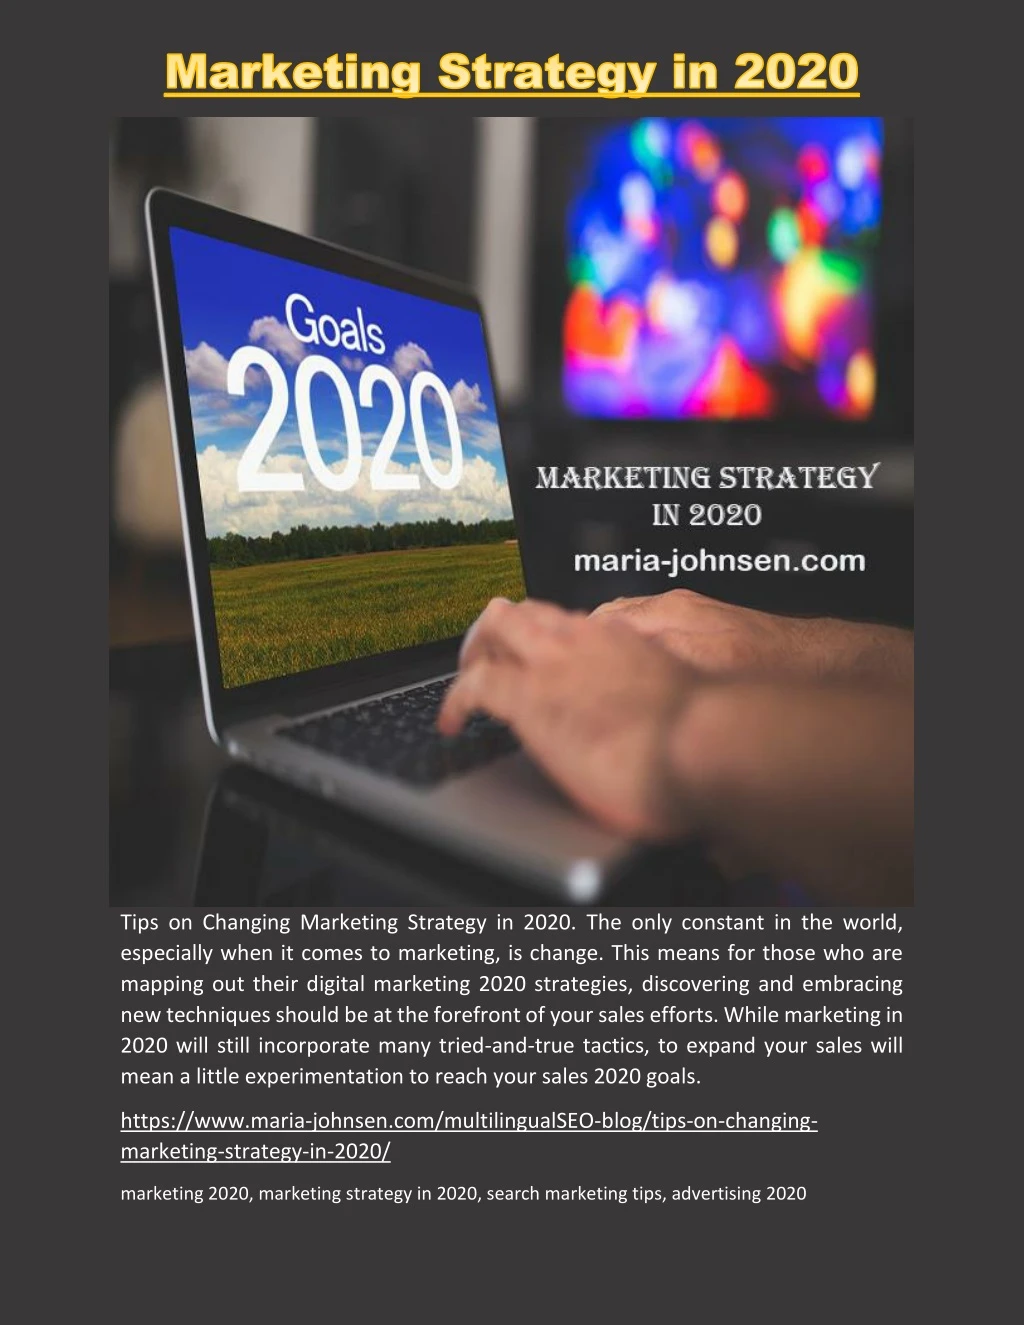 tips on changing marketing strategy in 2020